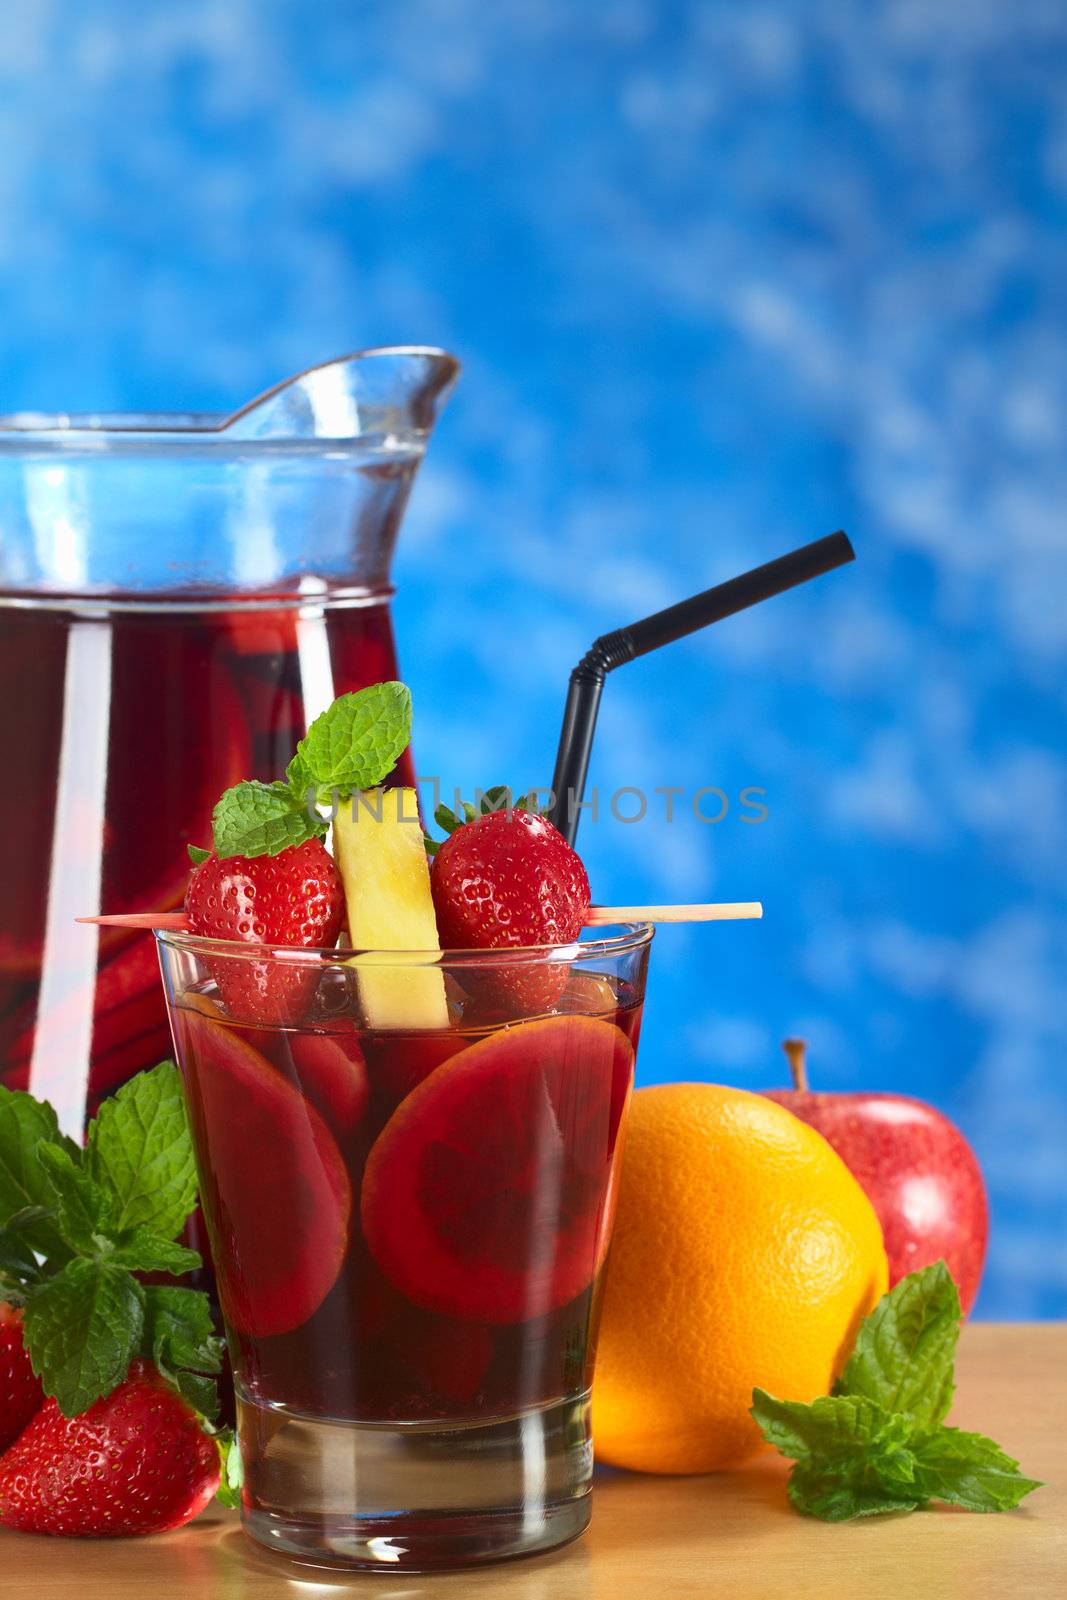 Refreshing red wine punch called sangria mixed with orange, apple and mango, garnished with strawberries and pineapple on skewer with a jug of sangria in the back and fruits around (Selective Focus, Focus on the fruits on the skewer)